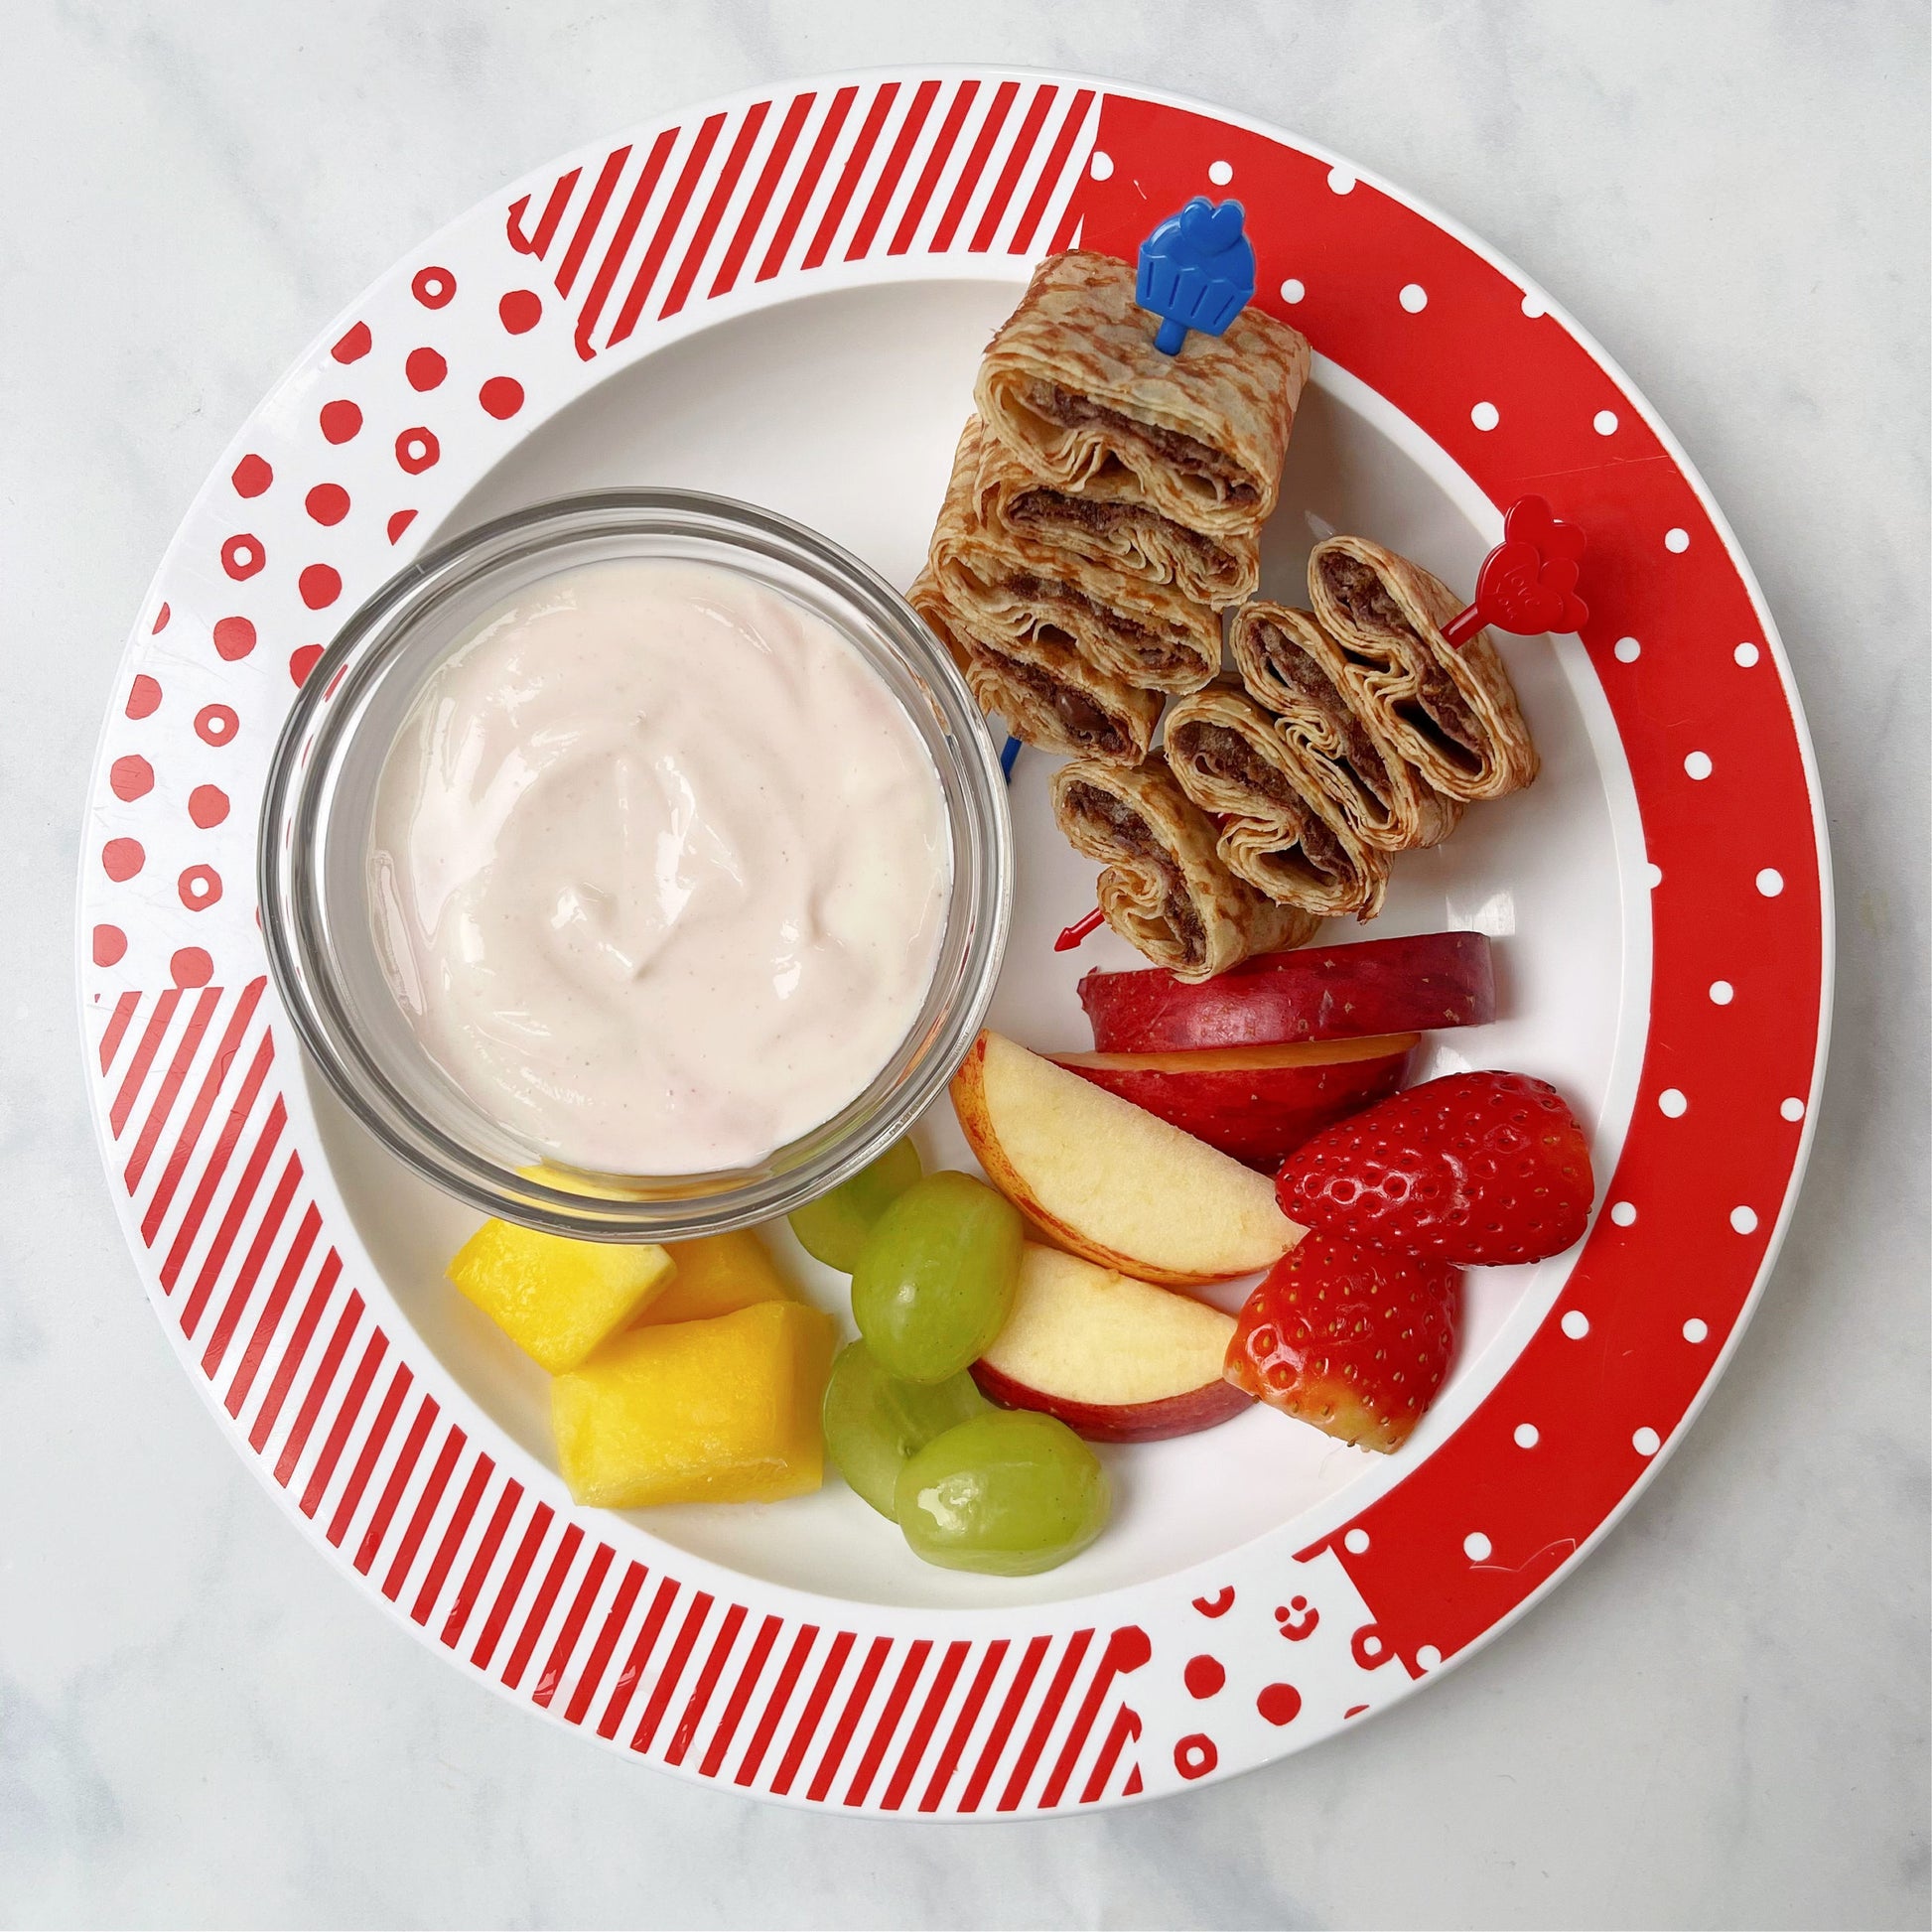 A red and blue Pick Stick with a chocolate filled crepe on each skewer, served on a classic range children's plate with a serving of yogurt and fresh fruit. 